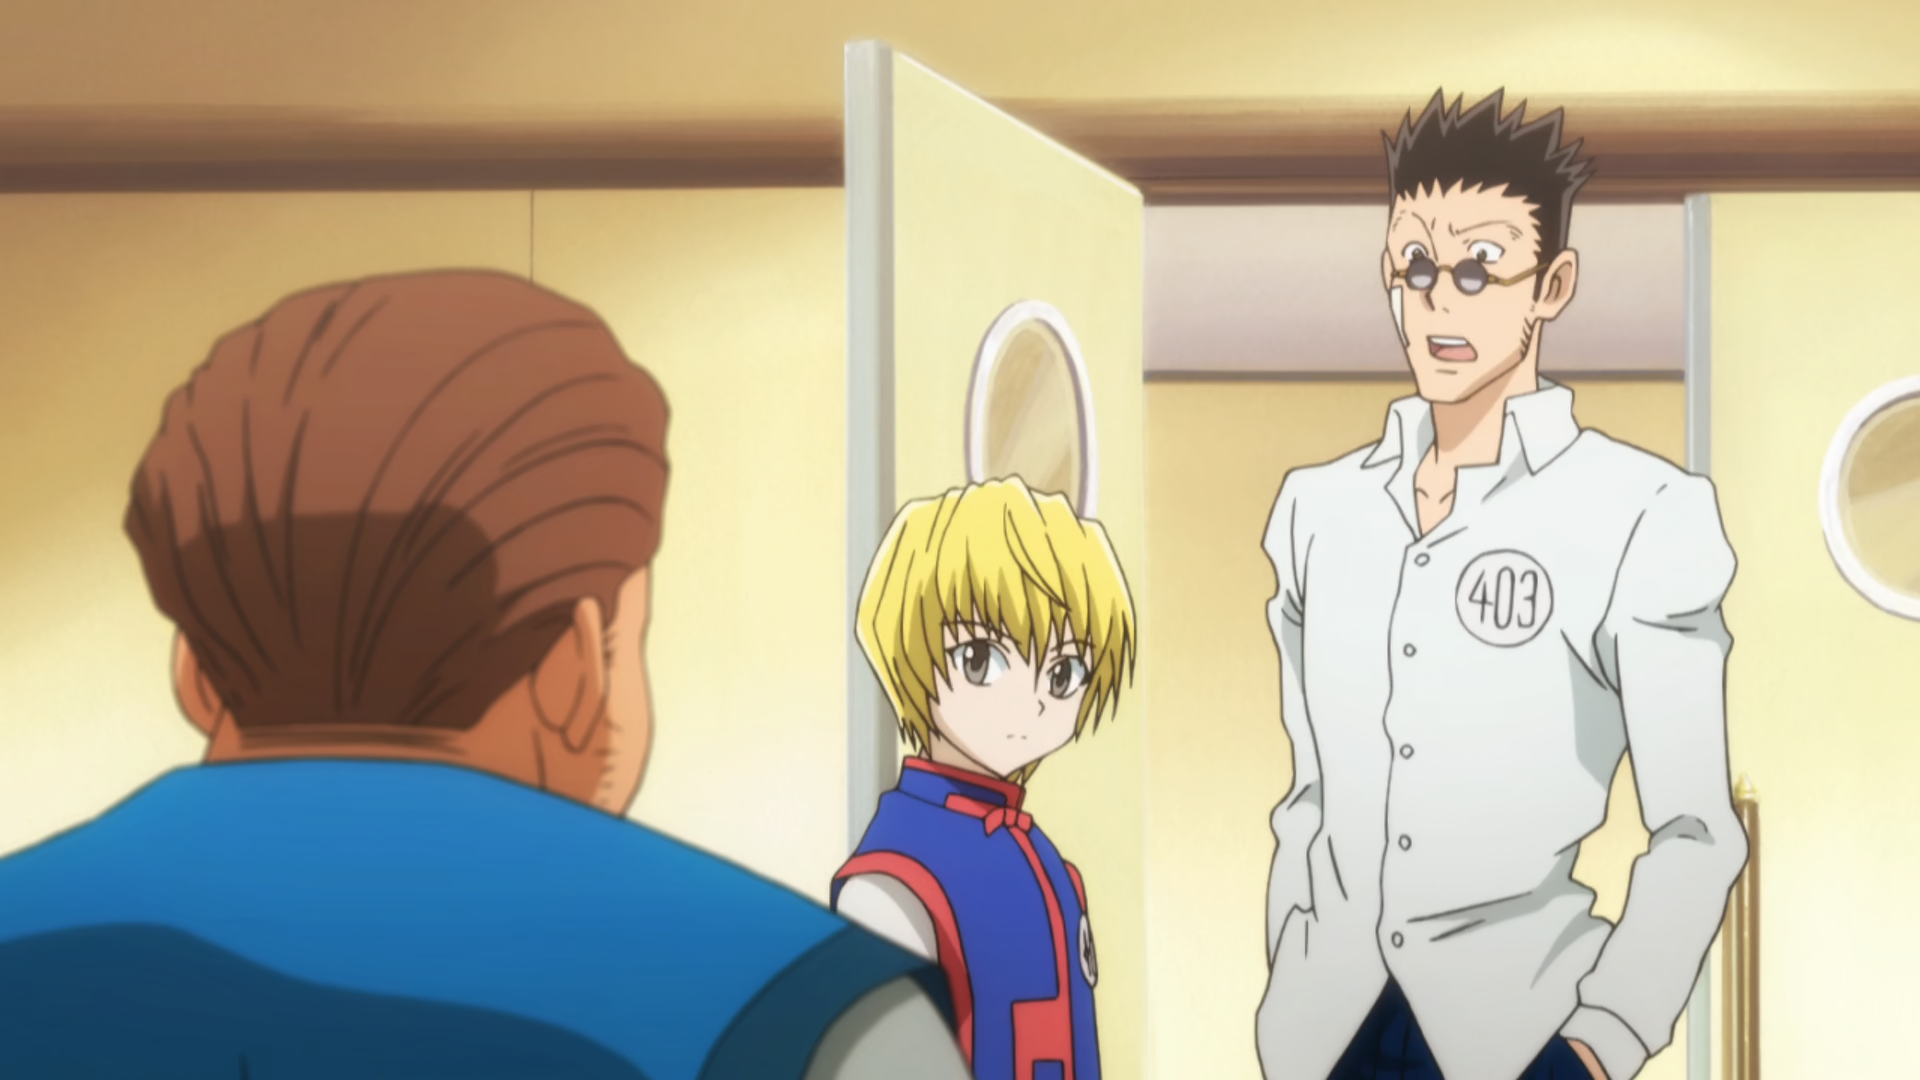 Hunter X Hunter - Episode 7 [English Subbed]  Hunter X Hunter - Episode 7  [English Subbed] Gon Freecss aspires to become a Hunter, an exceptional  being capable of greatness. With his